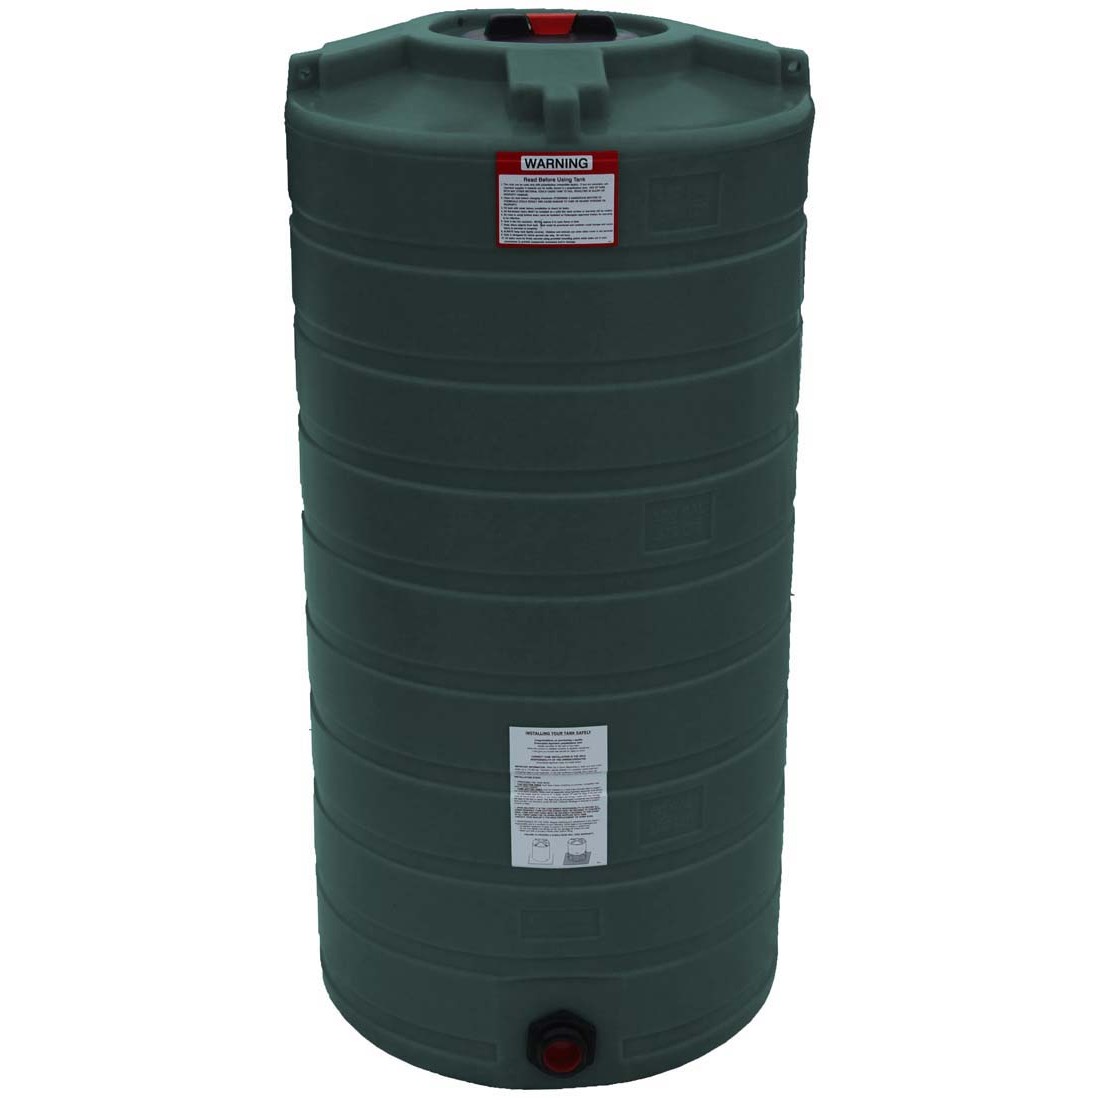 150 gallon vertical poly storage tank/container chemical or indoor water storage 